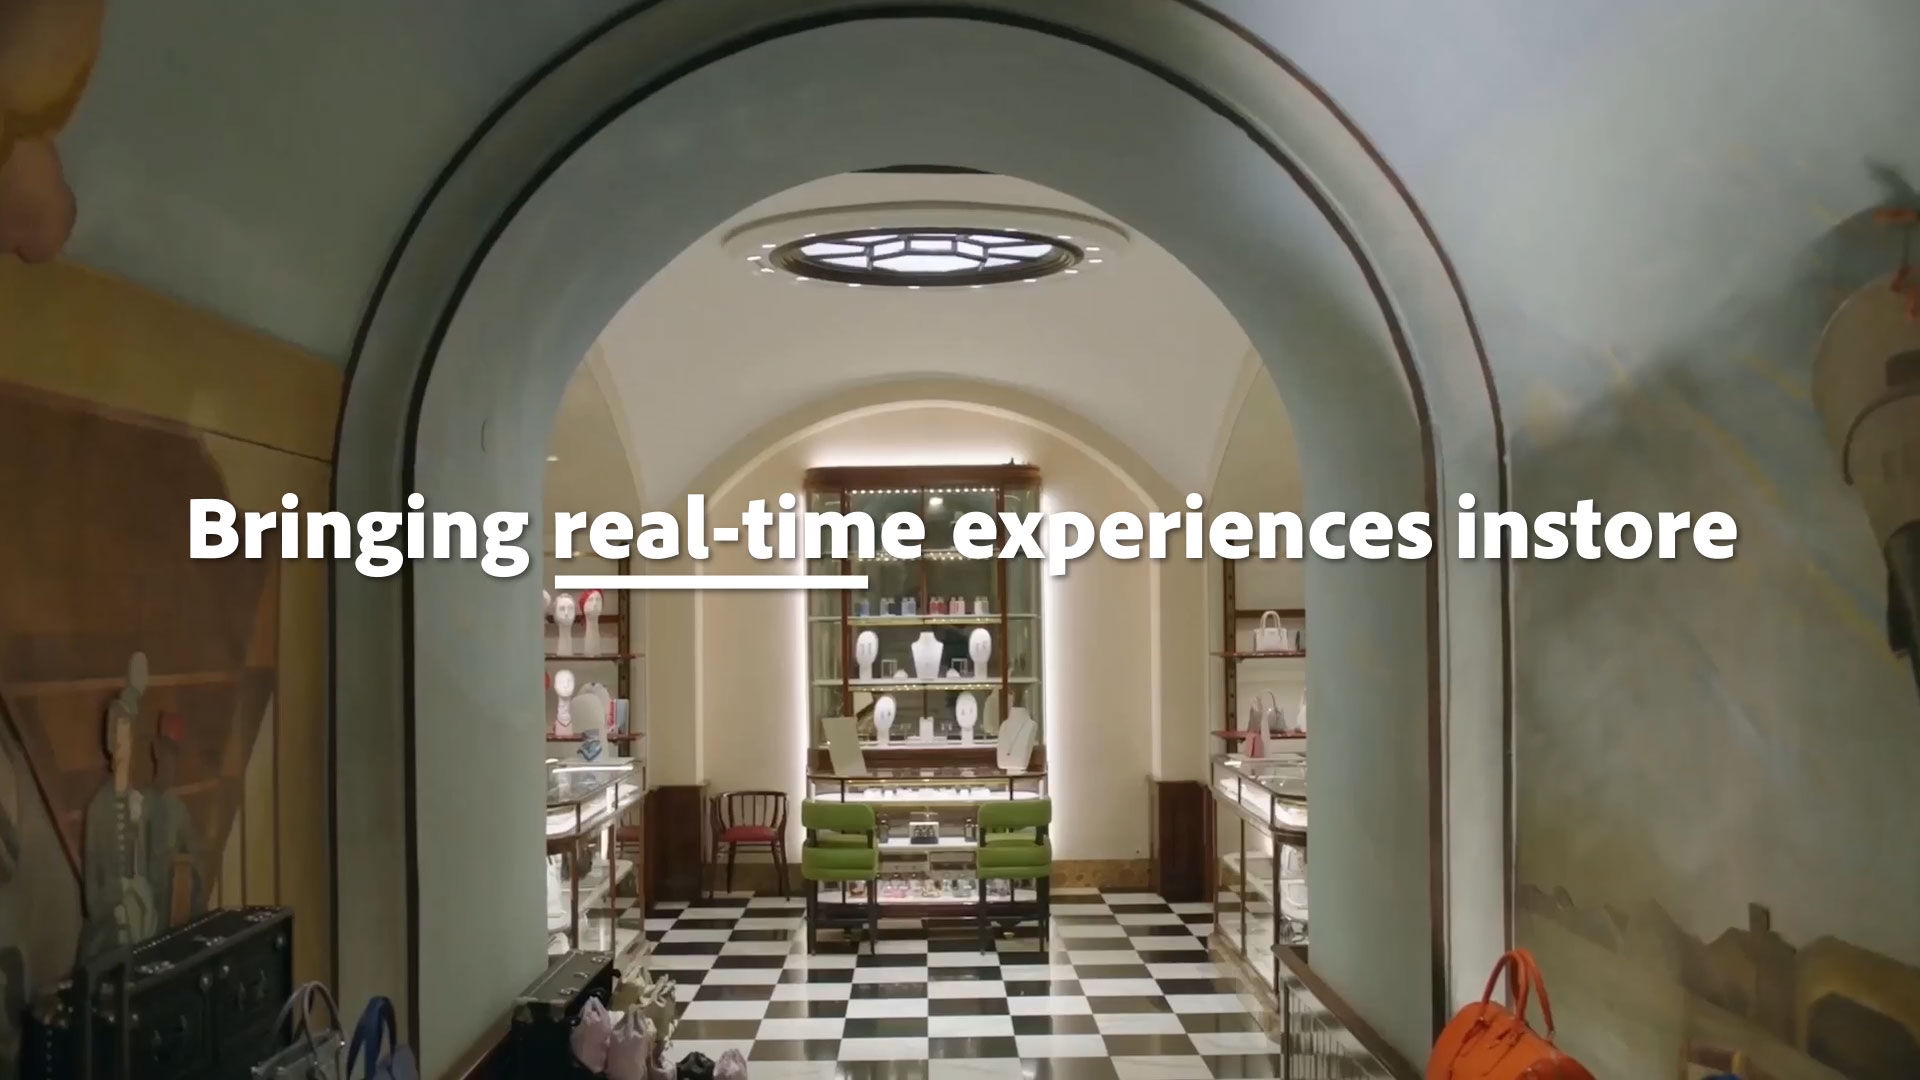 Prada Group Partners With Adobe to Reimagine In-store and Digital Experiences in Real Time